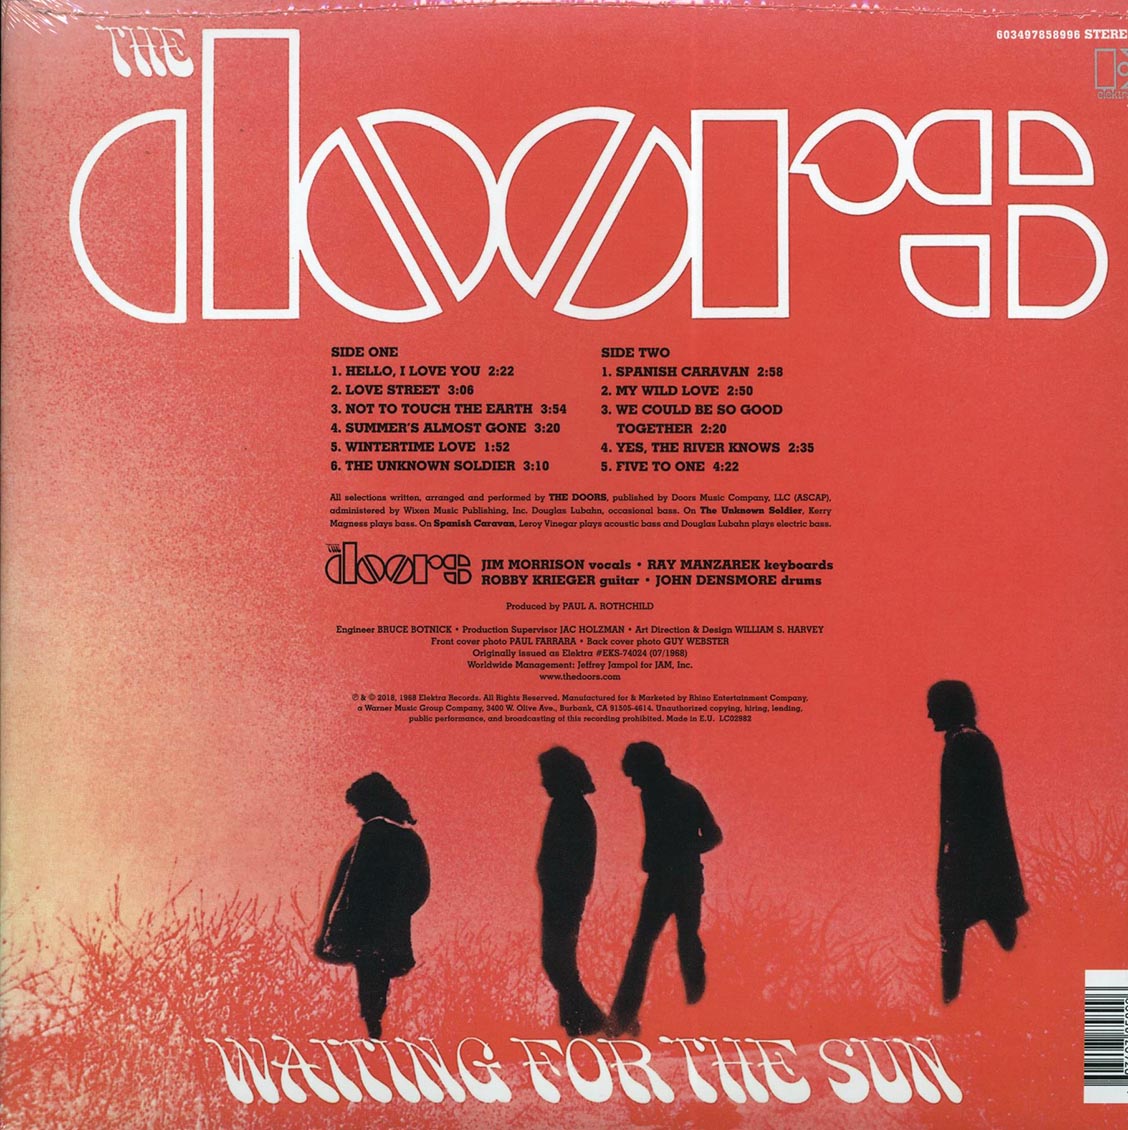 The Doors - Waiting For The Sun (stereo) (180g) (remastered) - Vinyl LP, LP